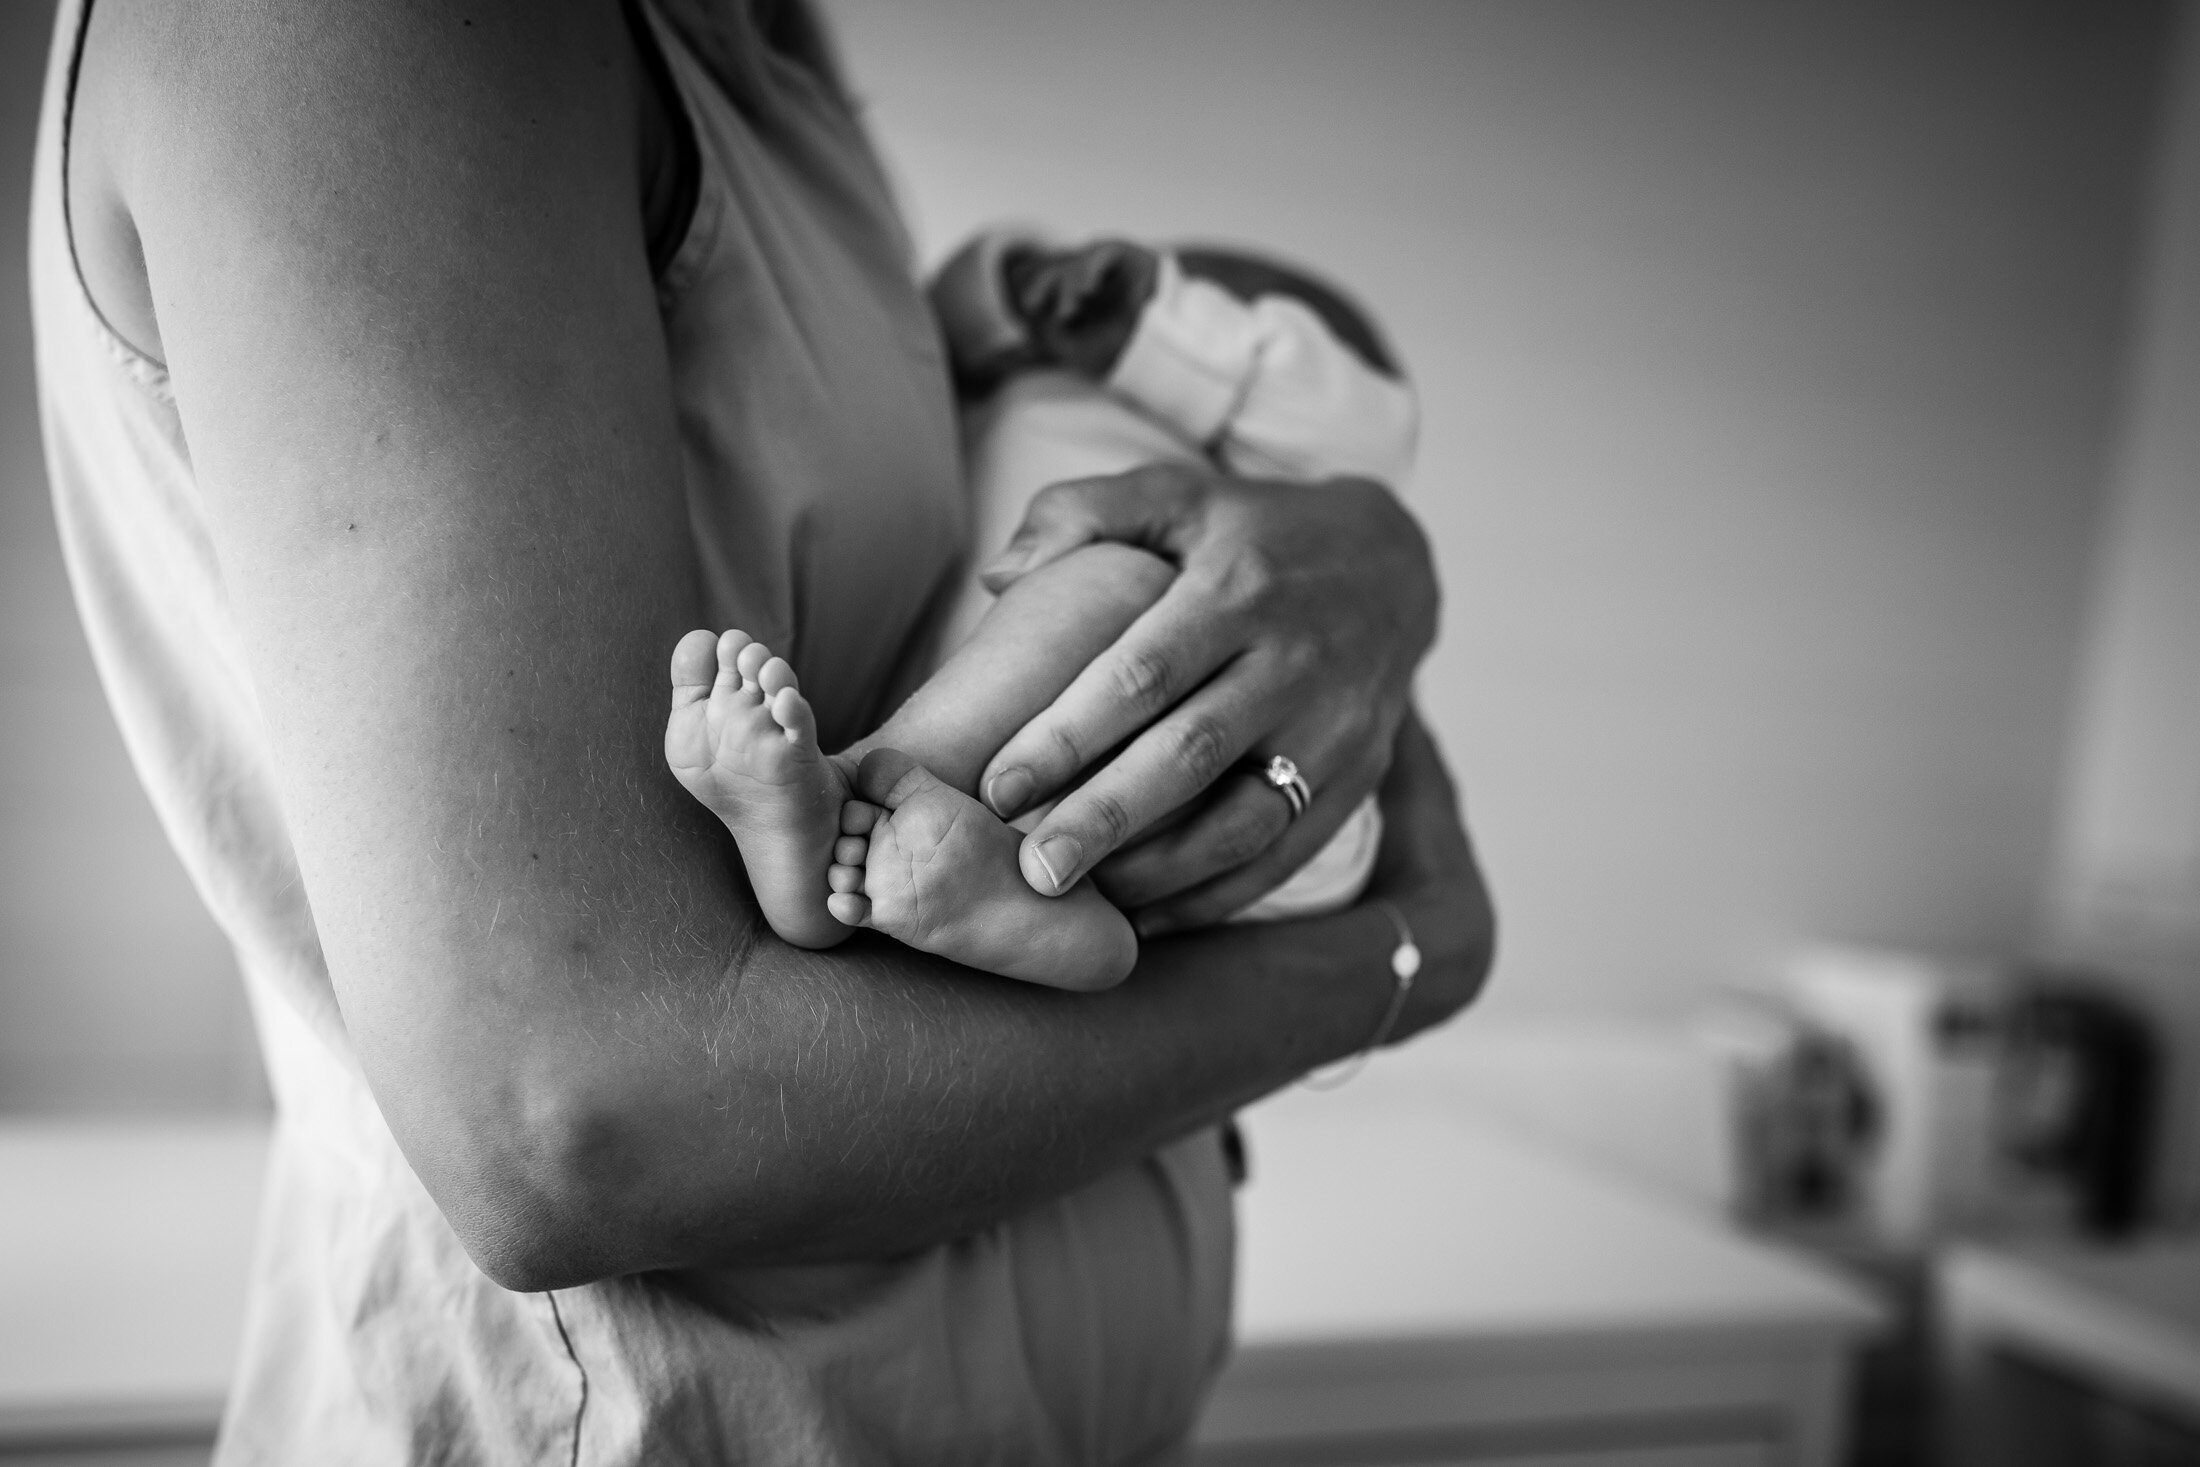 detail image of baby's feet during portland newborn photography lifestyle session.jpg